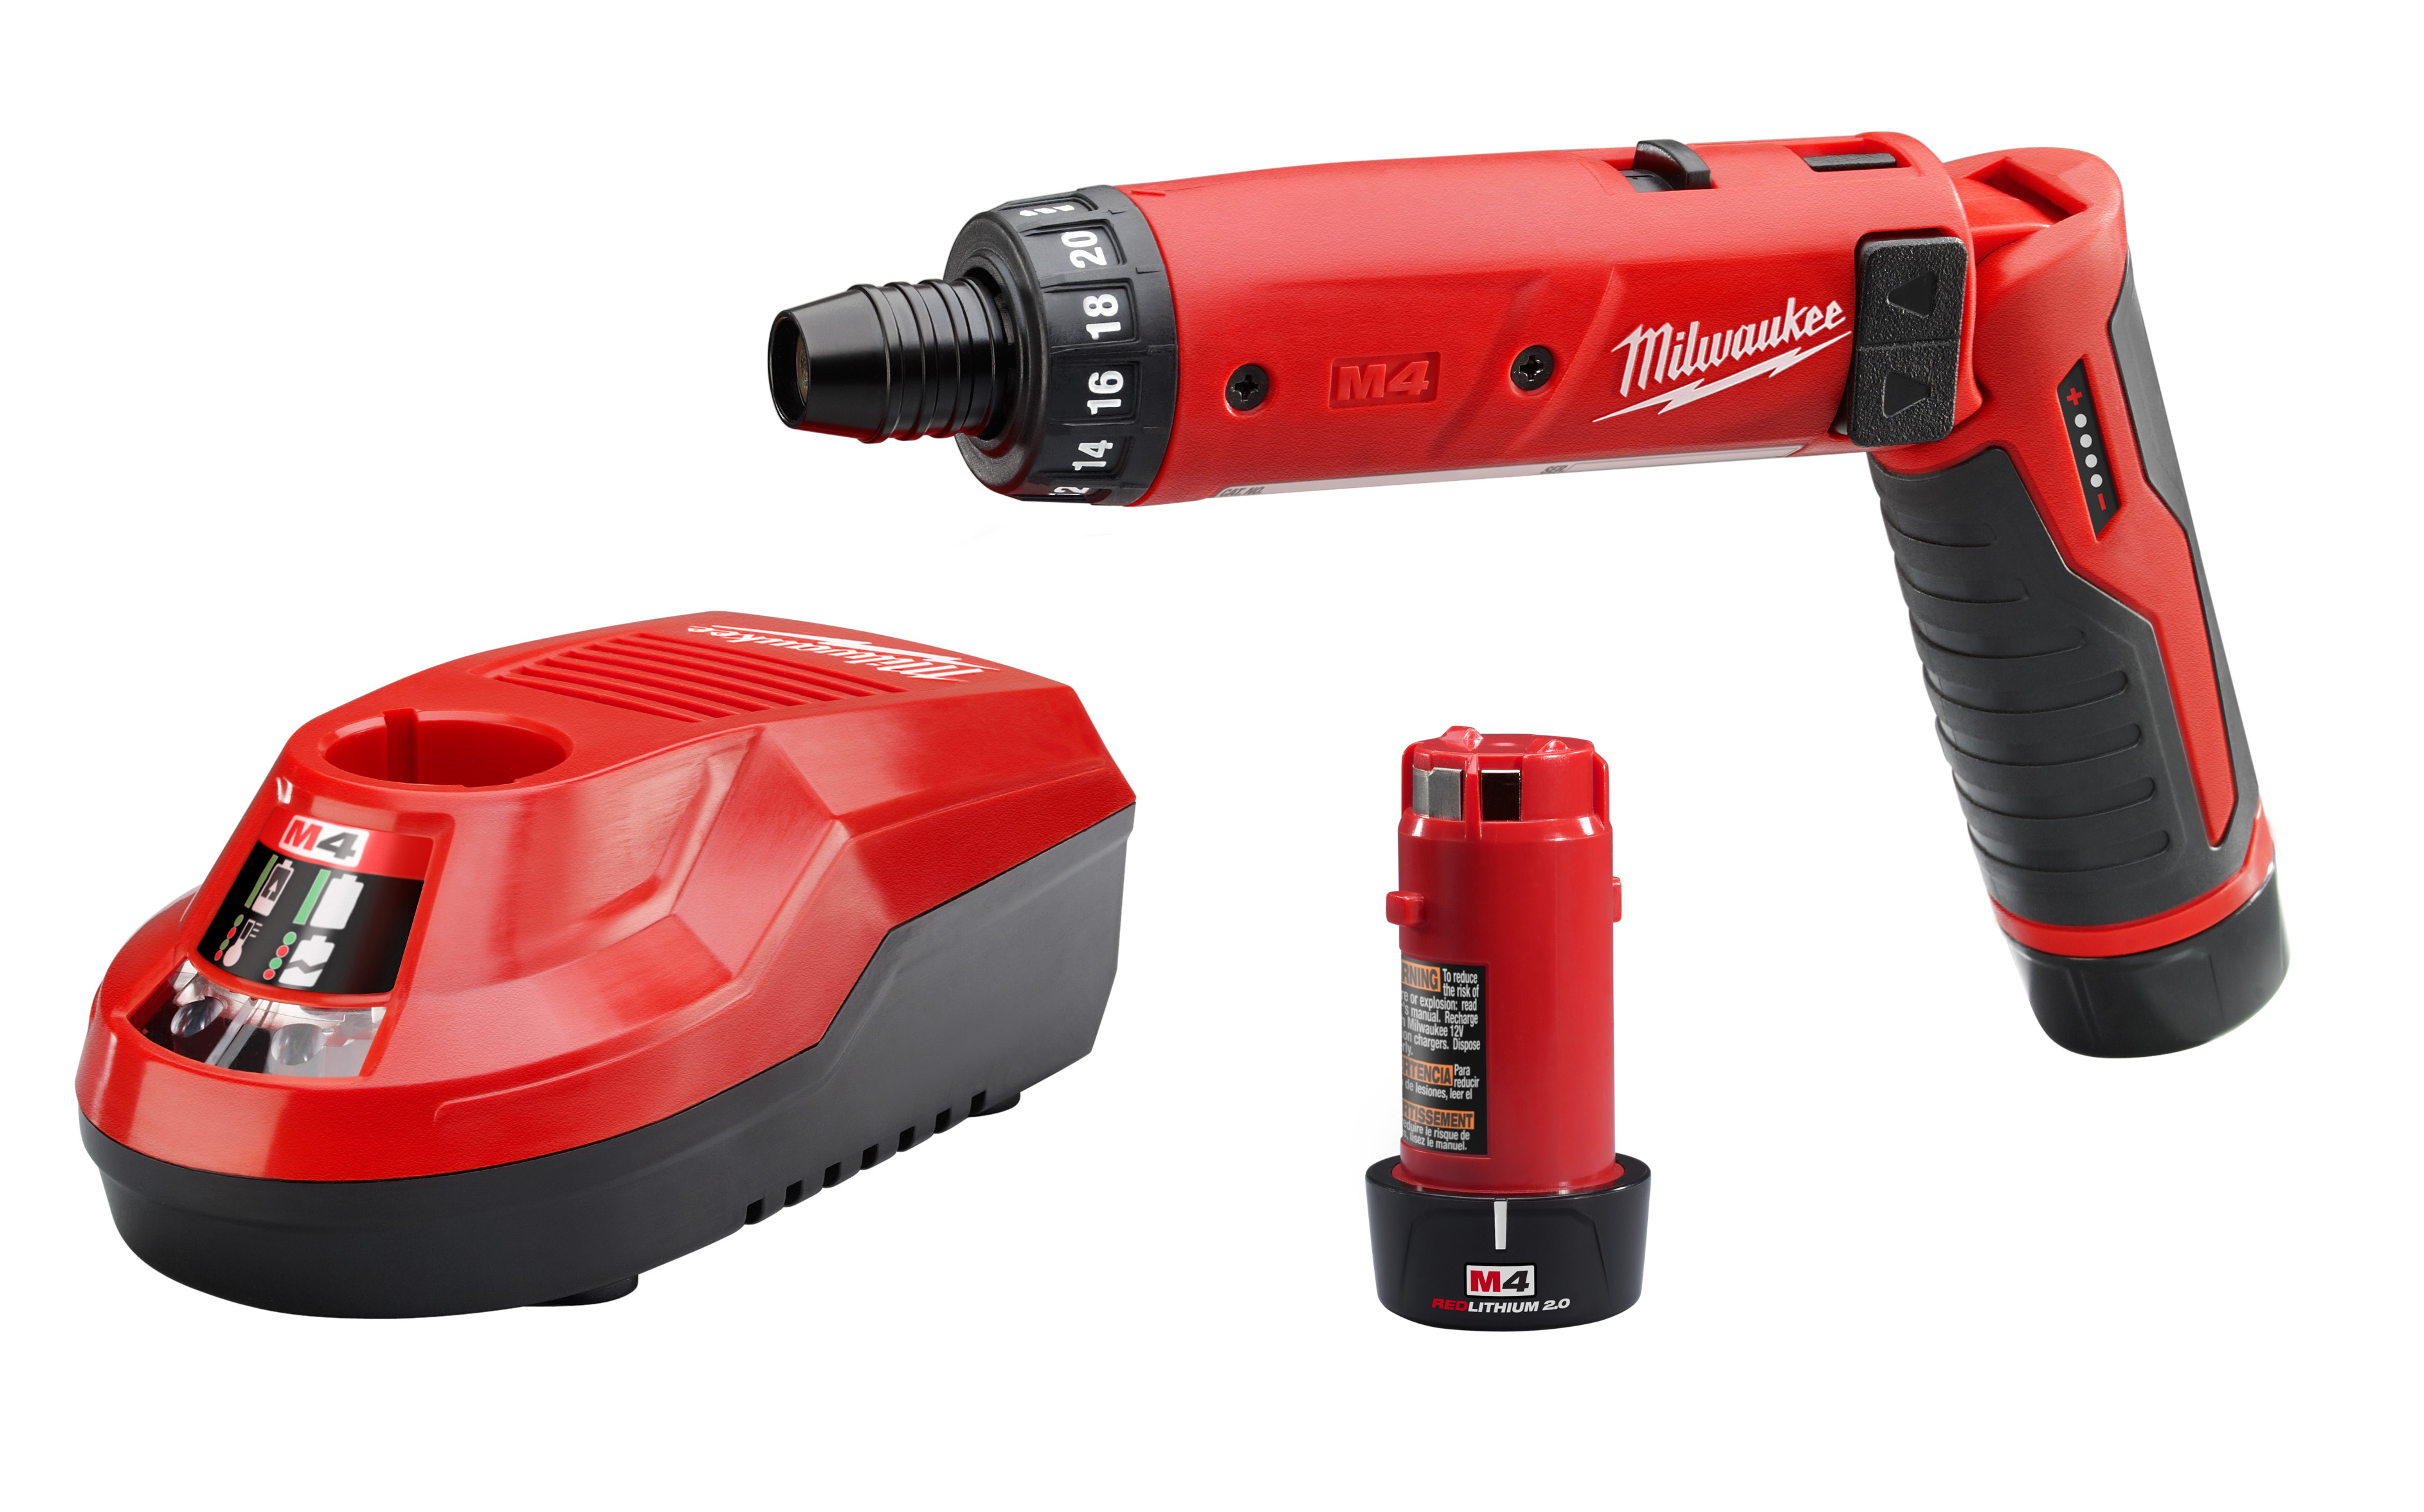 Milwaukee® 1660-6 Compact Grounded Electric Drill, 1/2 in Keyed Chuck, 120 VAC, 450 rpm Speed, 12-1/4 in OAL